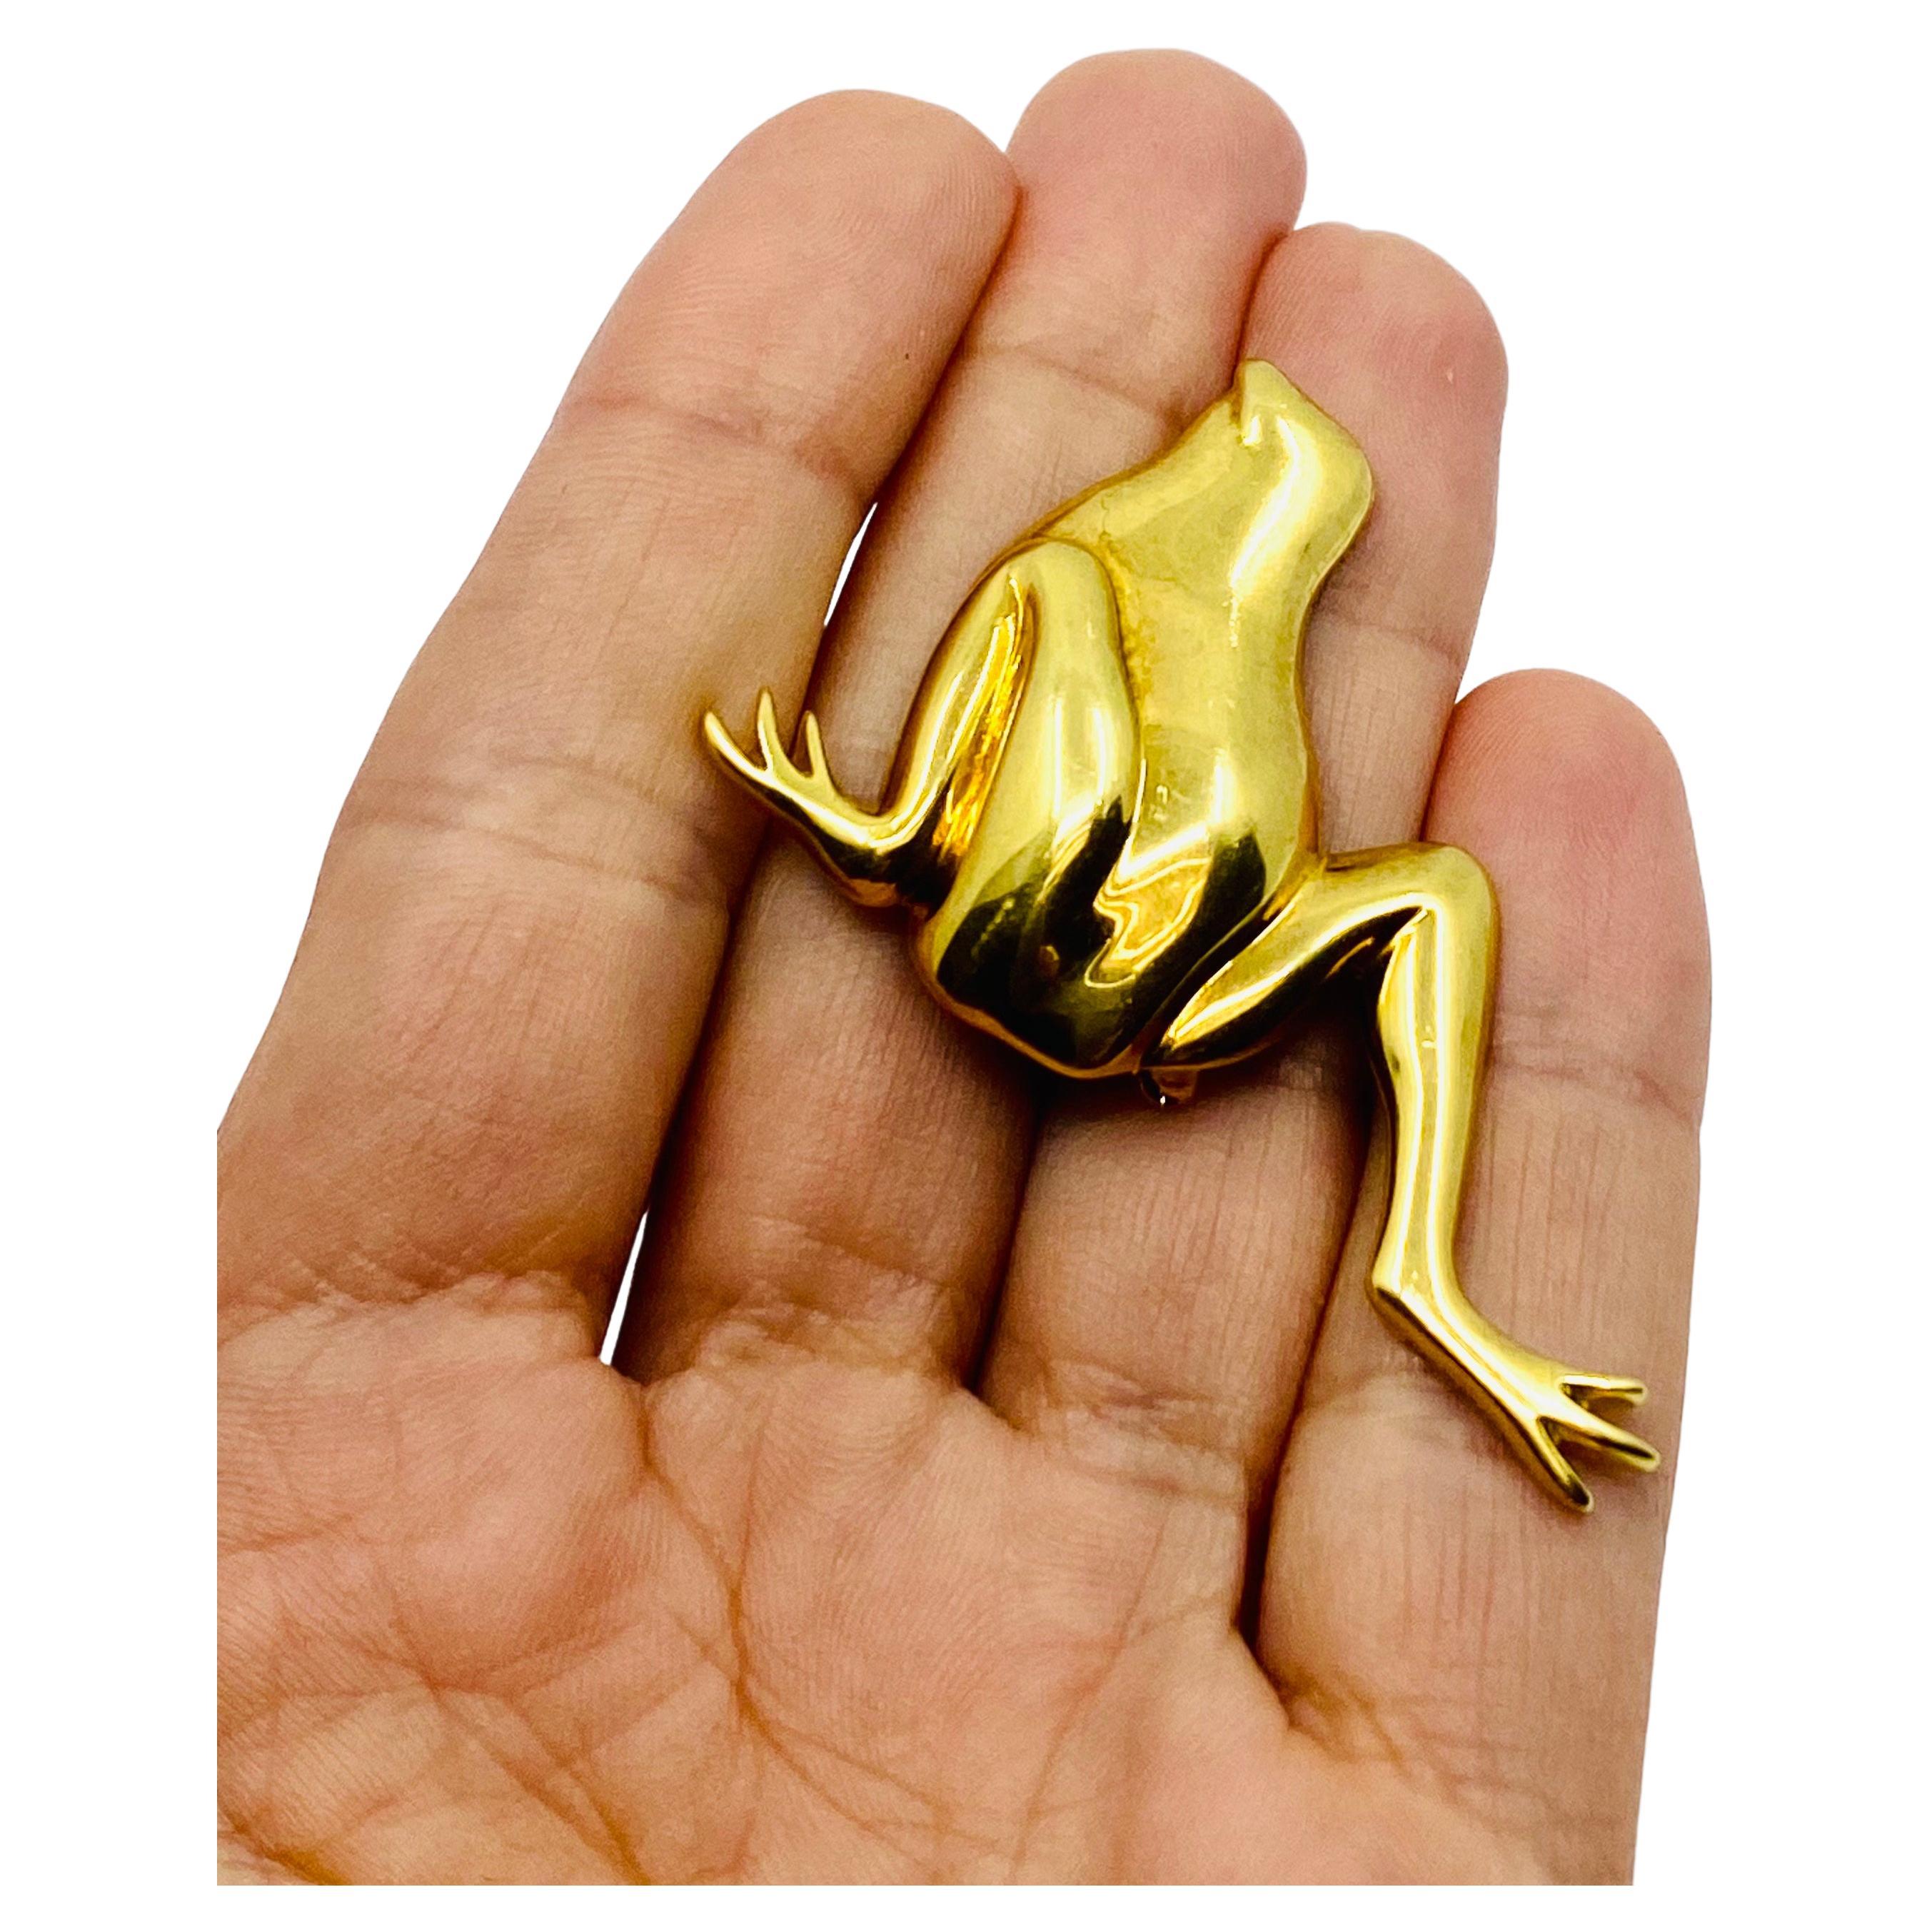 DESIGNER: Angela Cummings for Tiffany & Co.
CIRCA: 1981
MATERIALS: 18k Yellow Gold
WEIGHT: 13.3 grams
MEASUREMENTS: 1 1/2” x 2”
HALLMARKS: Cummings, 18K, 1981, Tiffany & Co. 

ITEM DETAILS:
A rare Angela Cummings frog pin made of 18k gold for